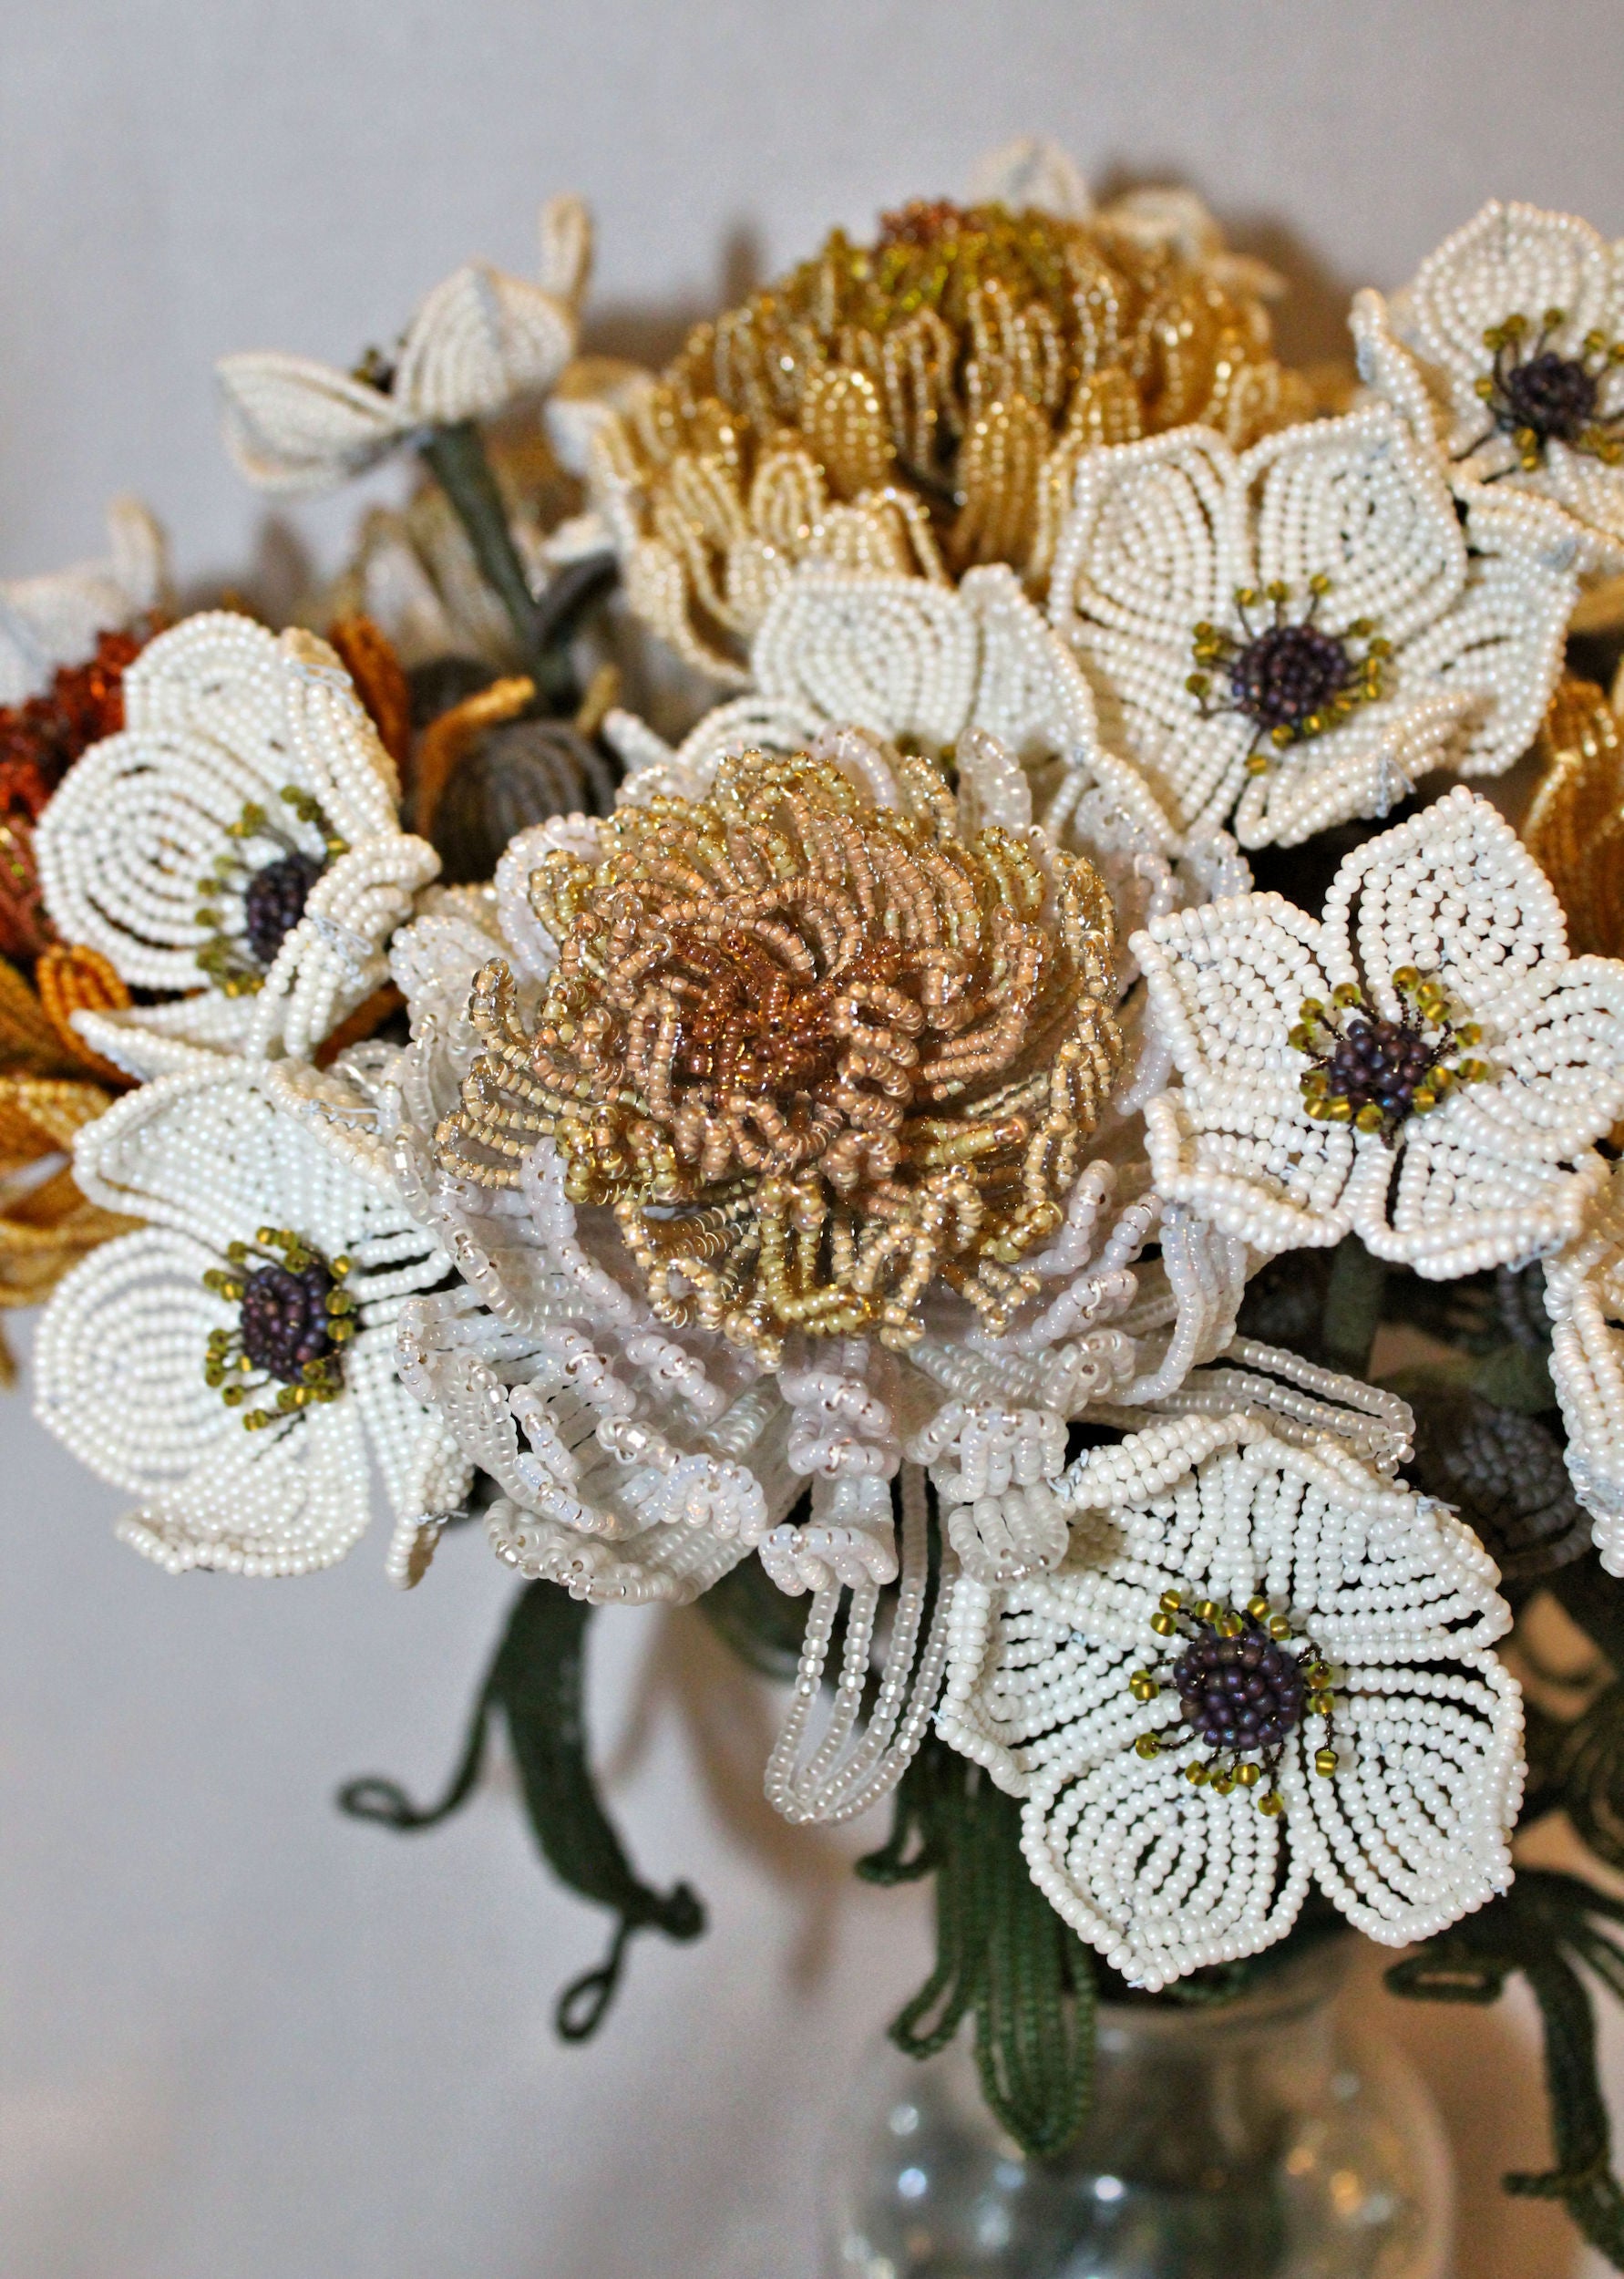 Versailles Bouquet of Chrysanthemums and Almond Blossoms